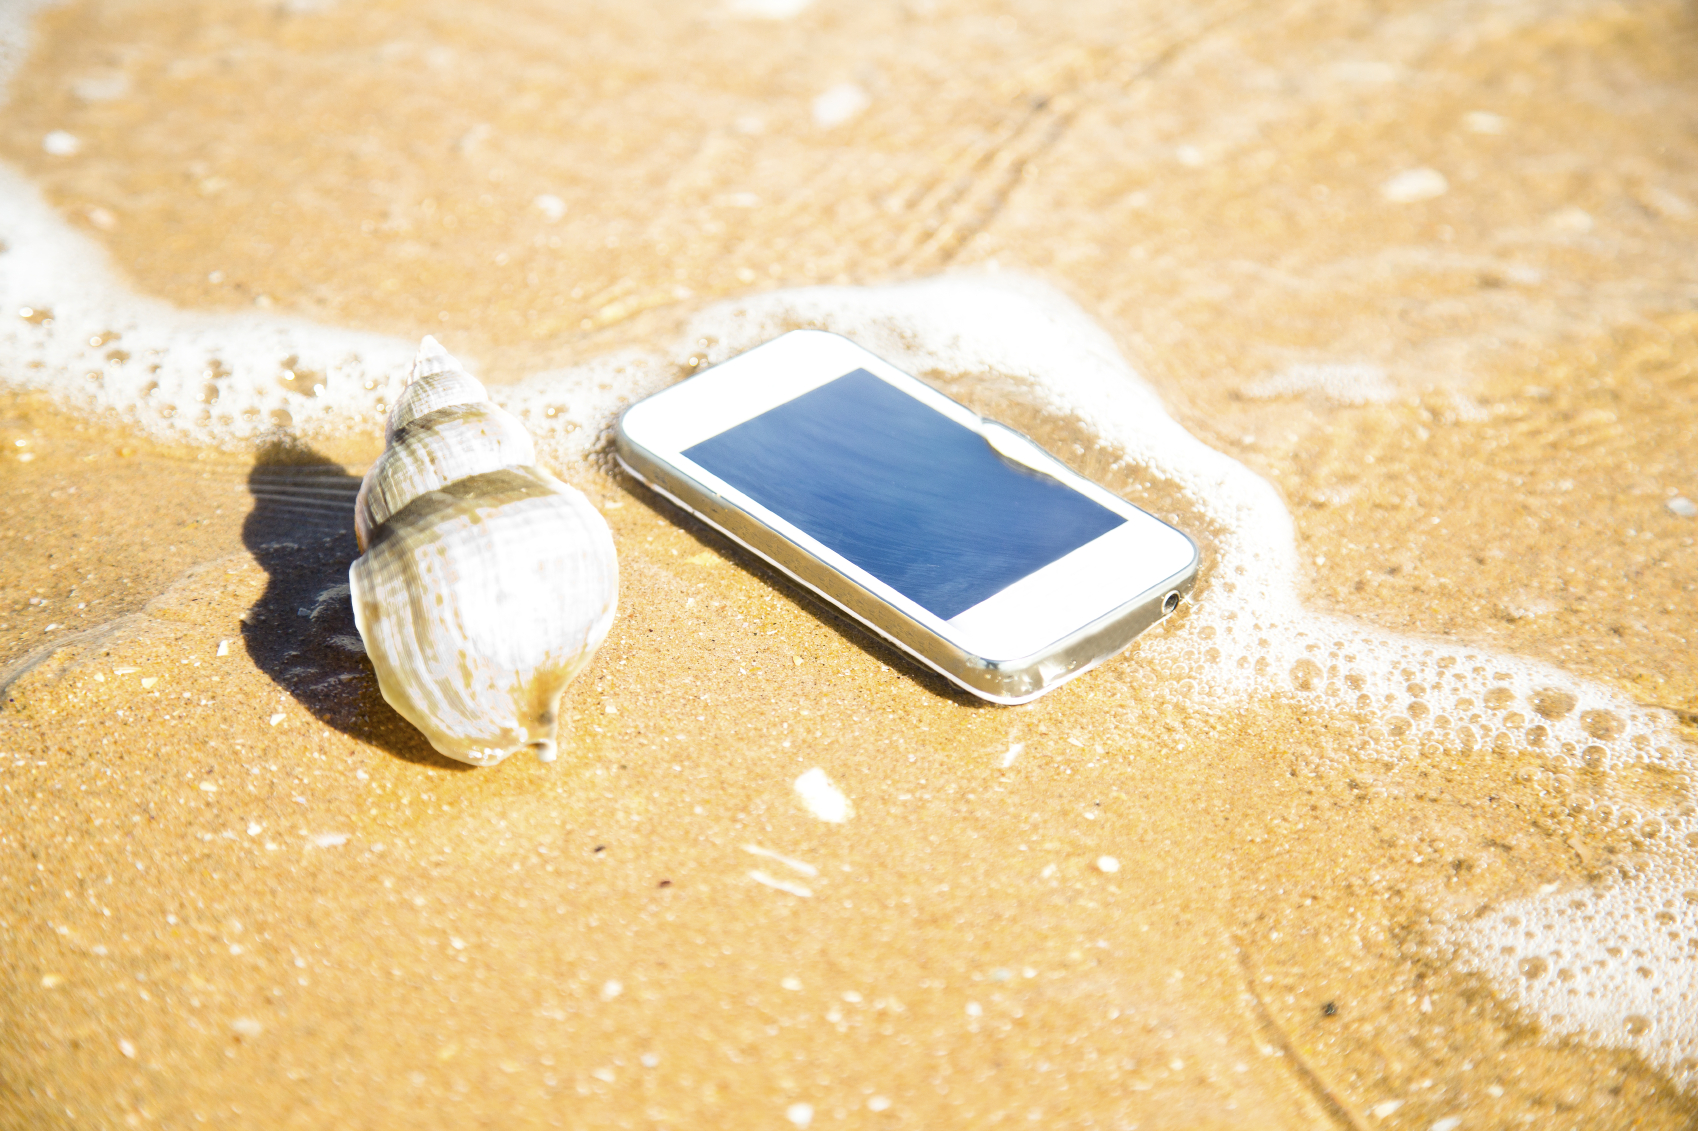 Protecting your Phones from Water Damage this Summer